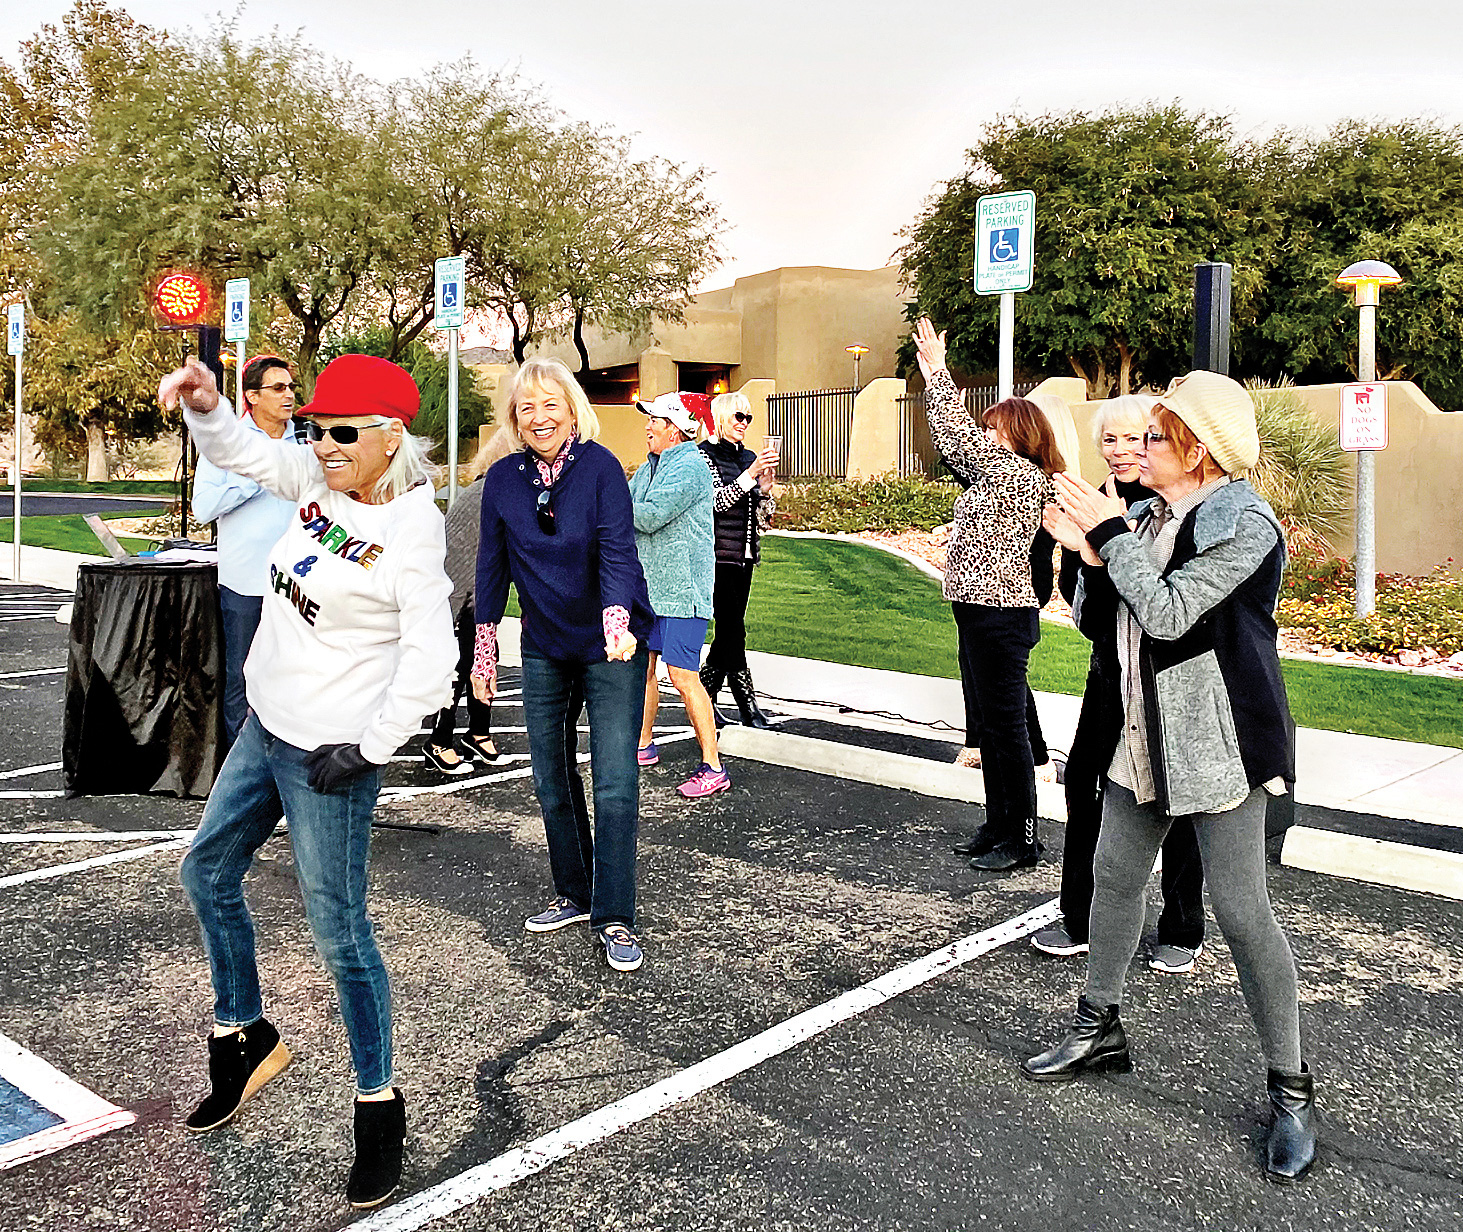 Loose women firing on all cylinders at the Preserve Parking Lot Recharging Station. (Photo by Edward Routzong)